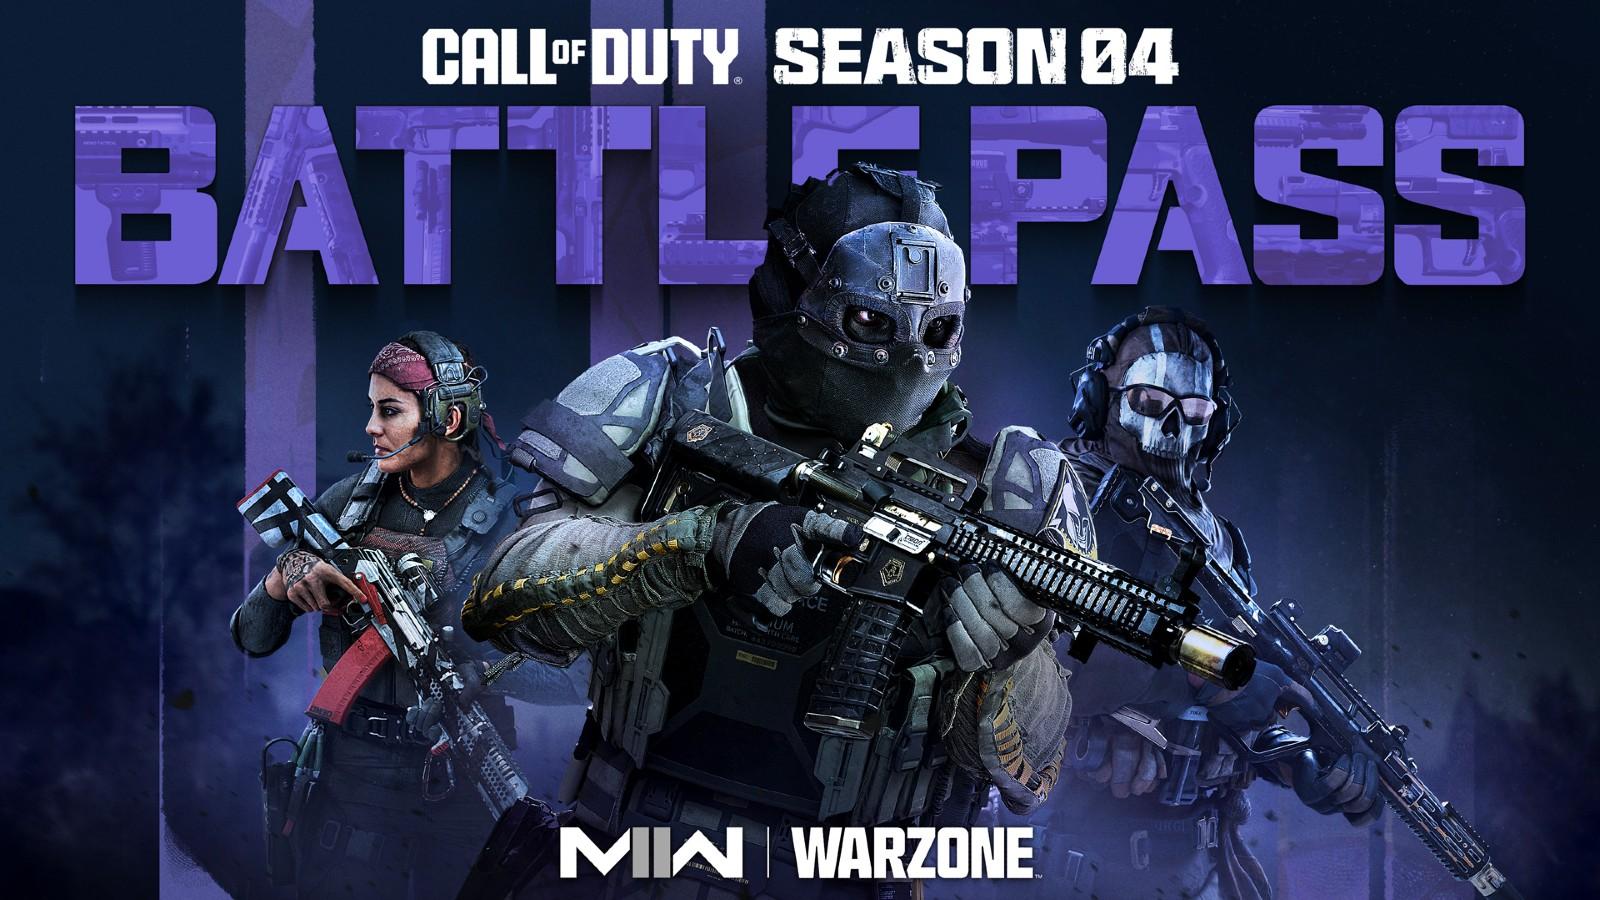 MW2/Warzone 2 Season 2 Battle Pass price & what's included